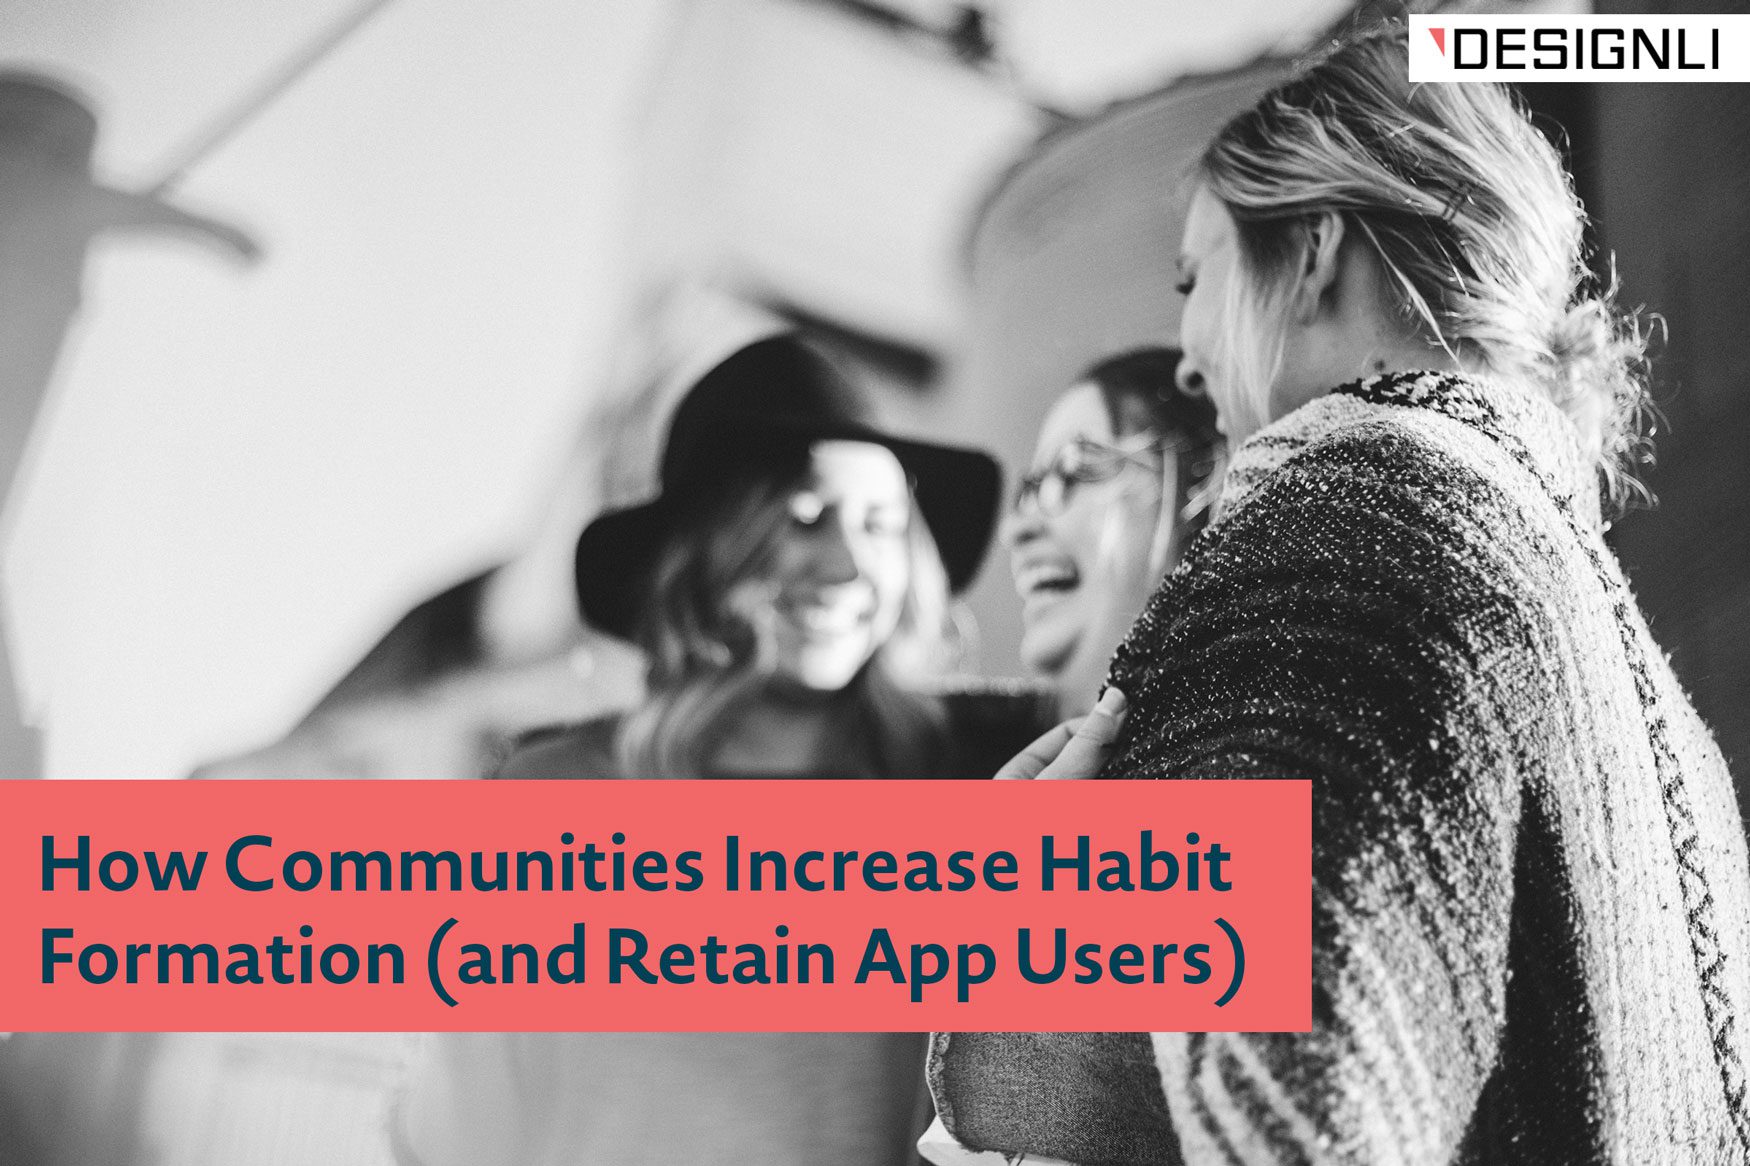 How Communities Increase Habit Formation (and Retain App Users)